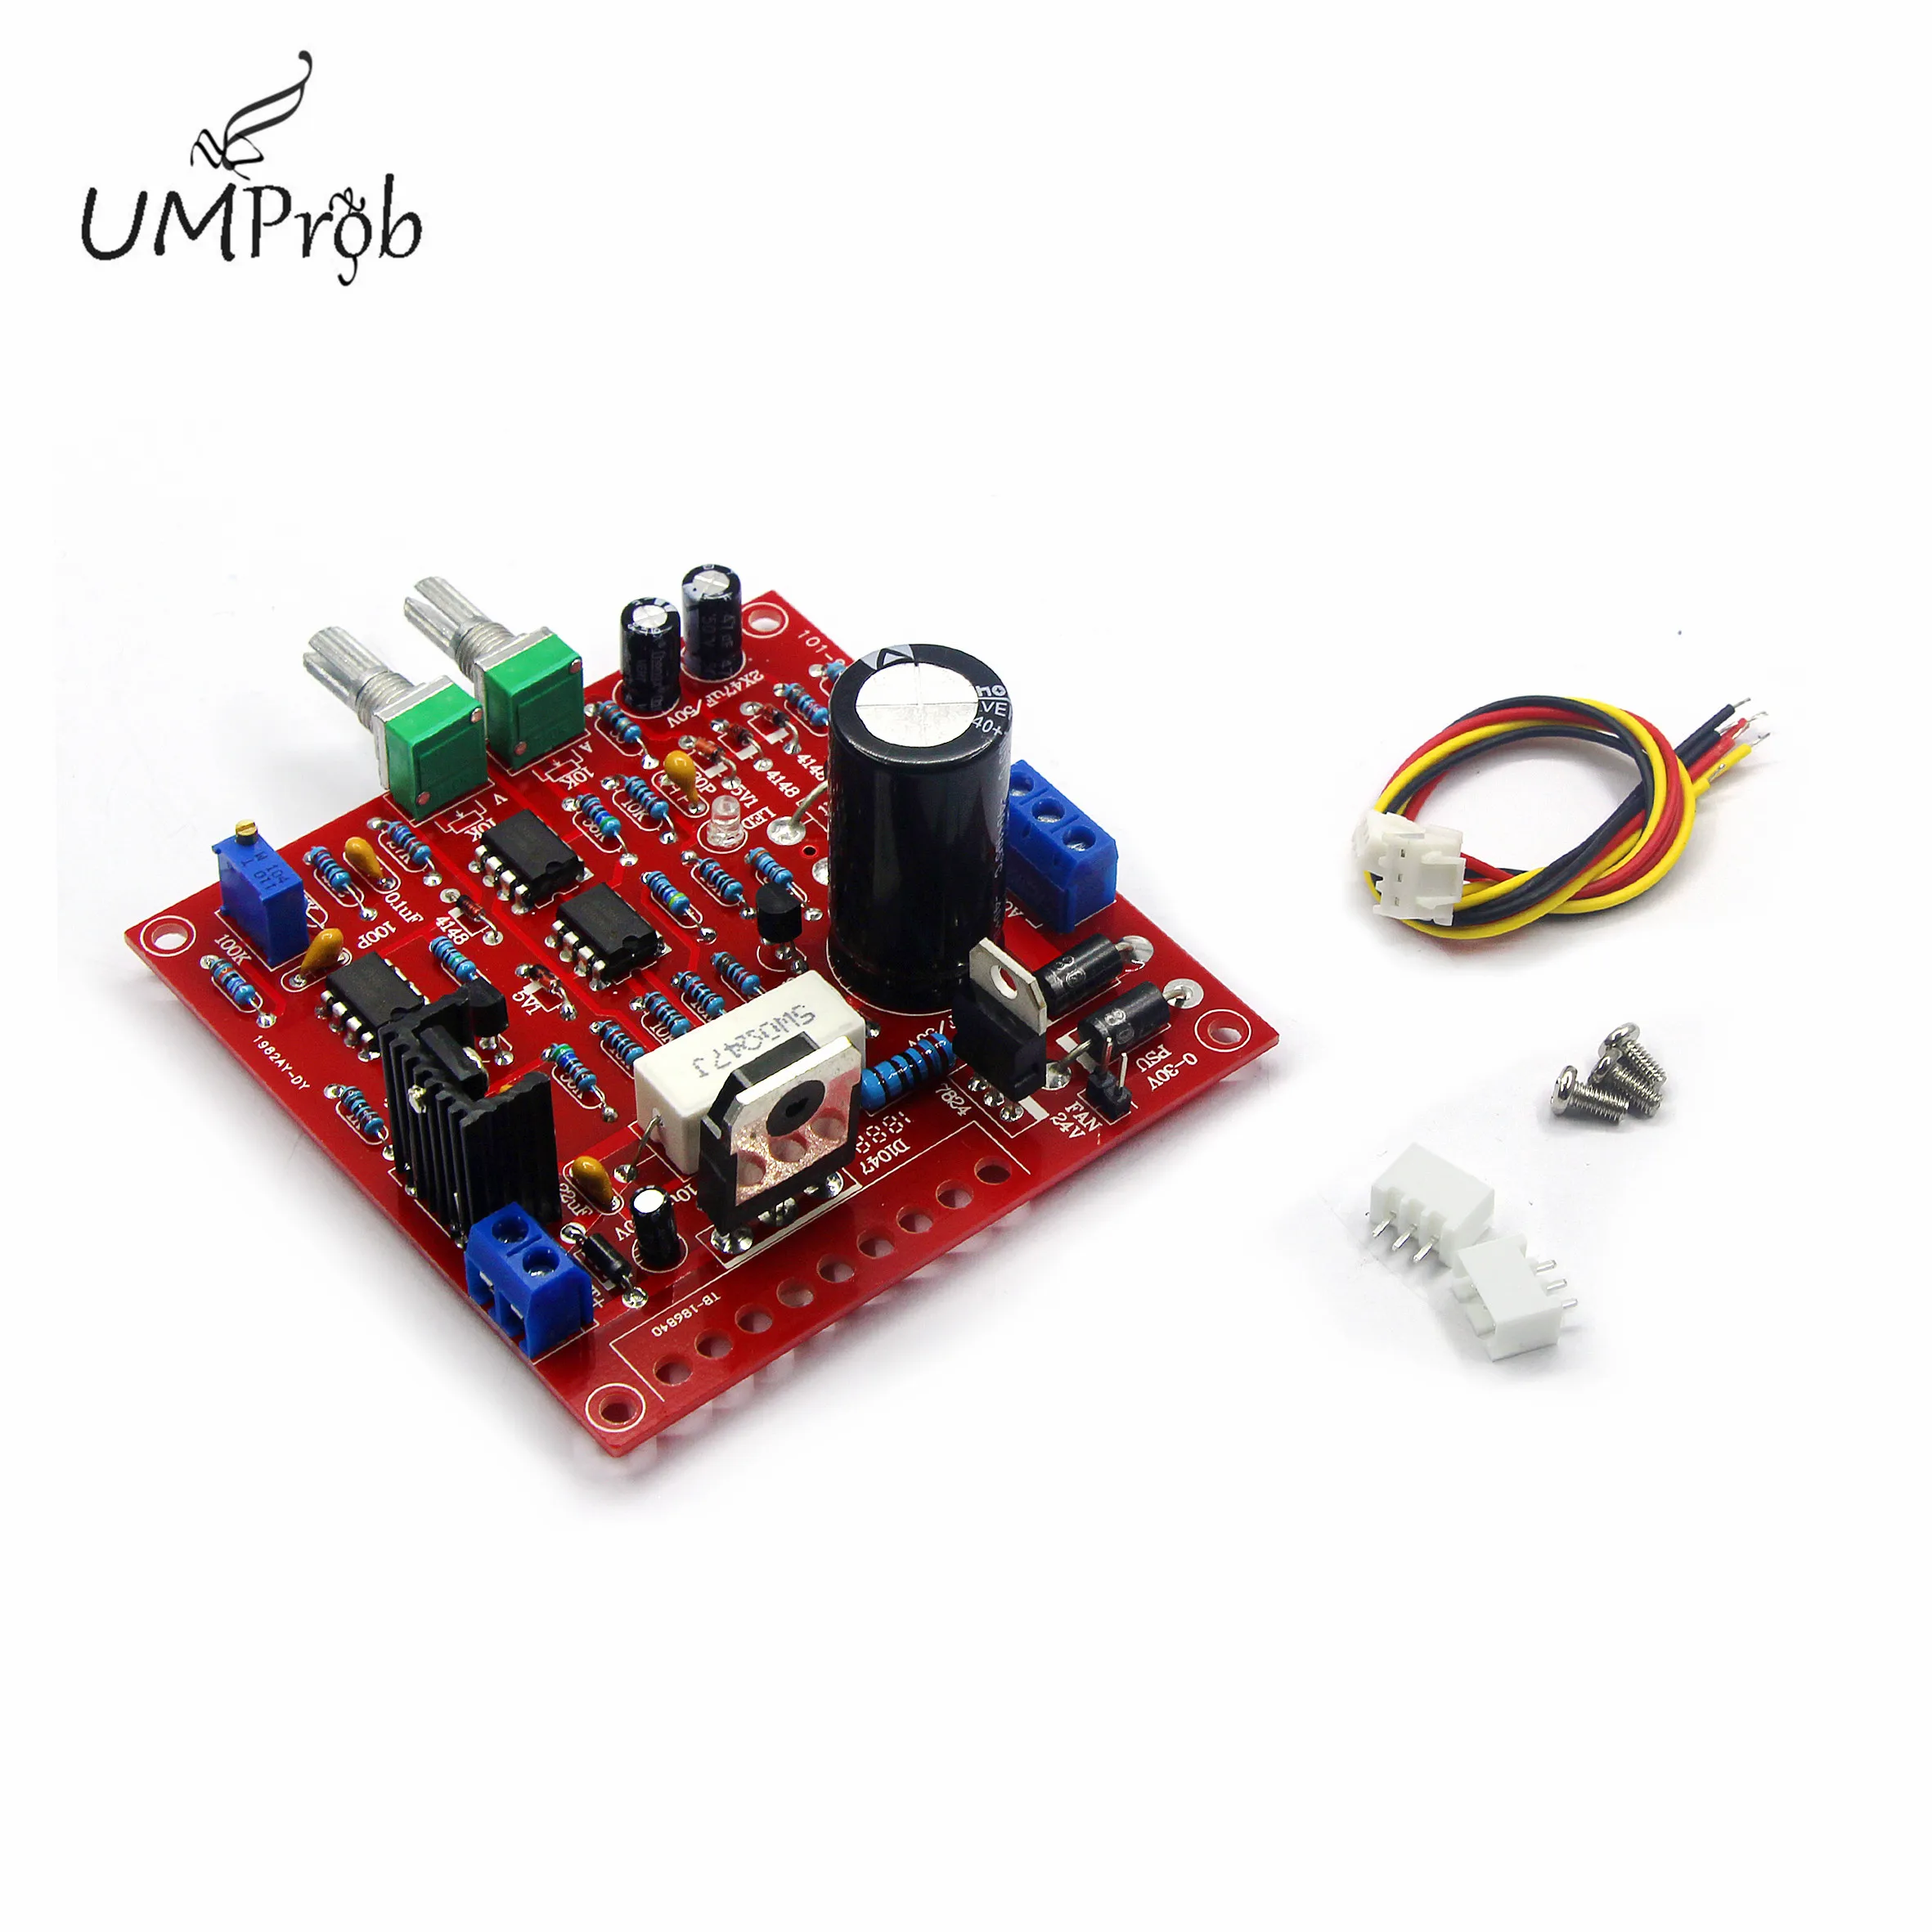 Stabilized Continuous Adjustable DC Regulated Power Supply Kit 0-30V 2mA-3A G3 